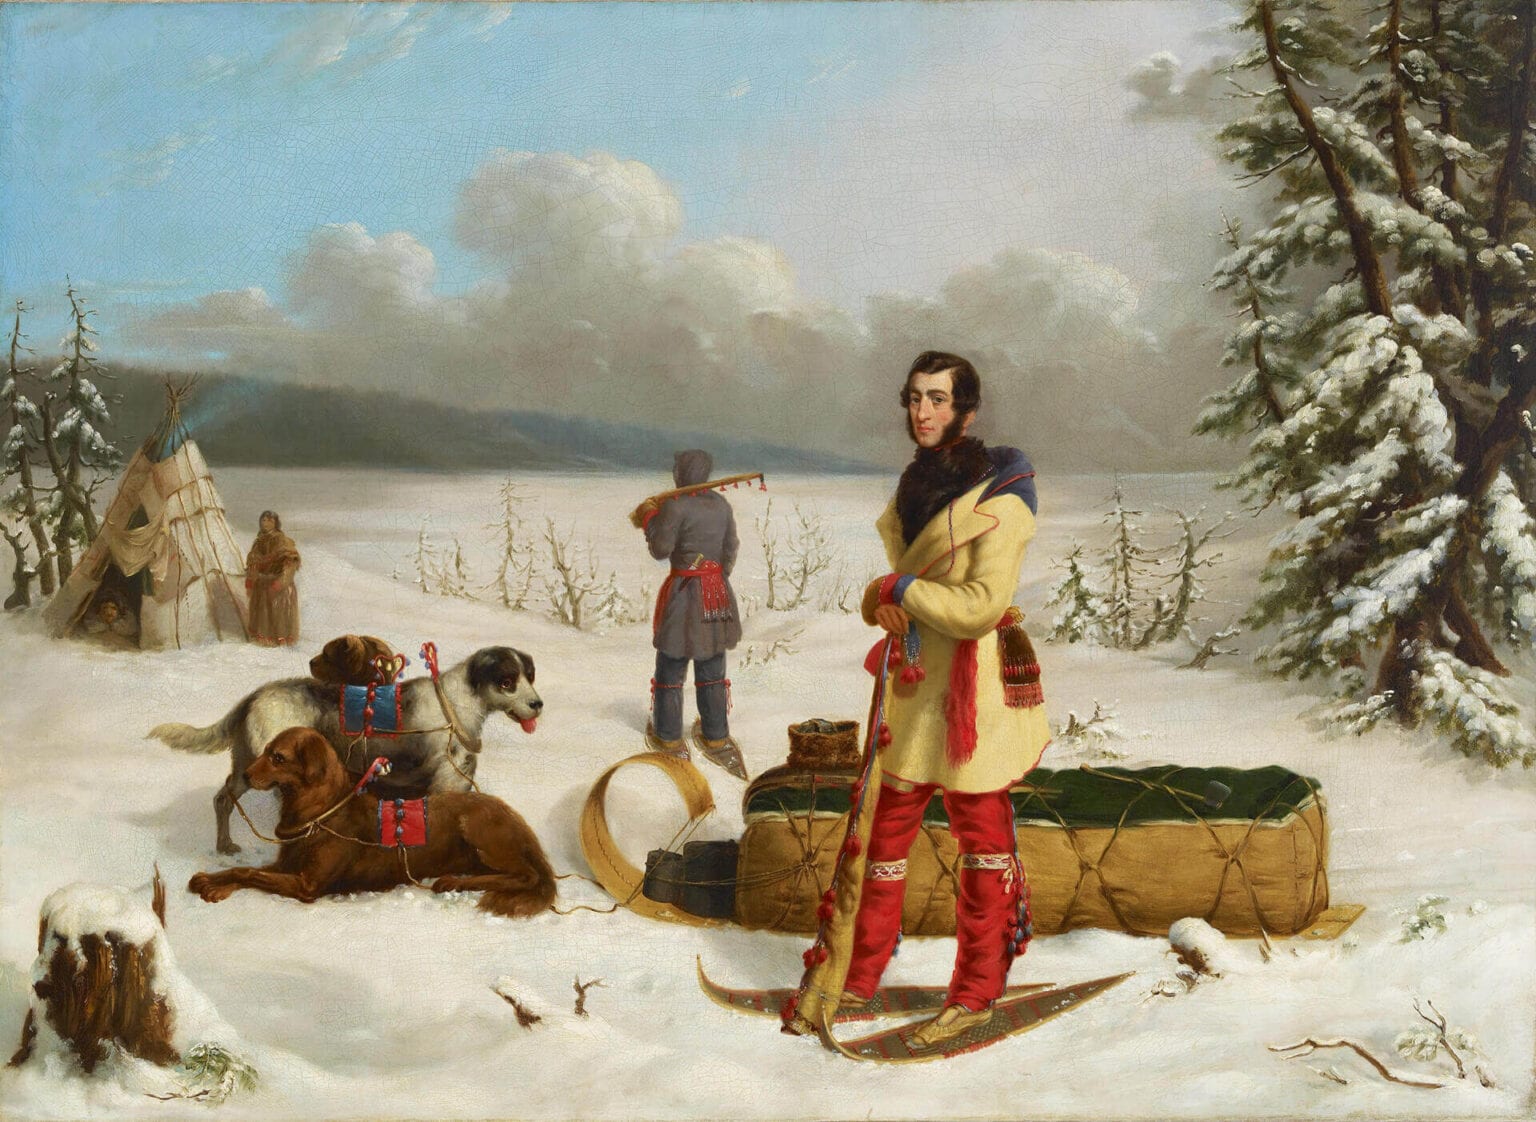 Two Athabascan gun cases in a painting by Canadian painter Paul Kane.